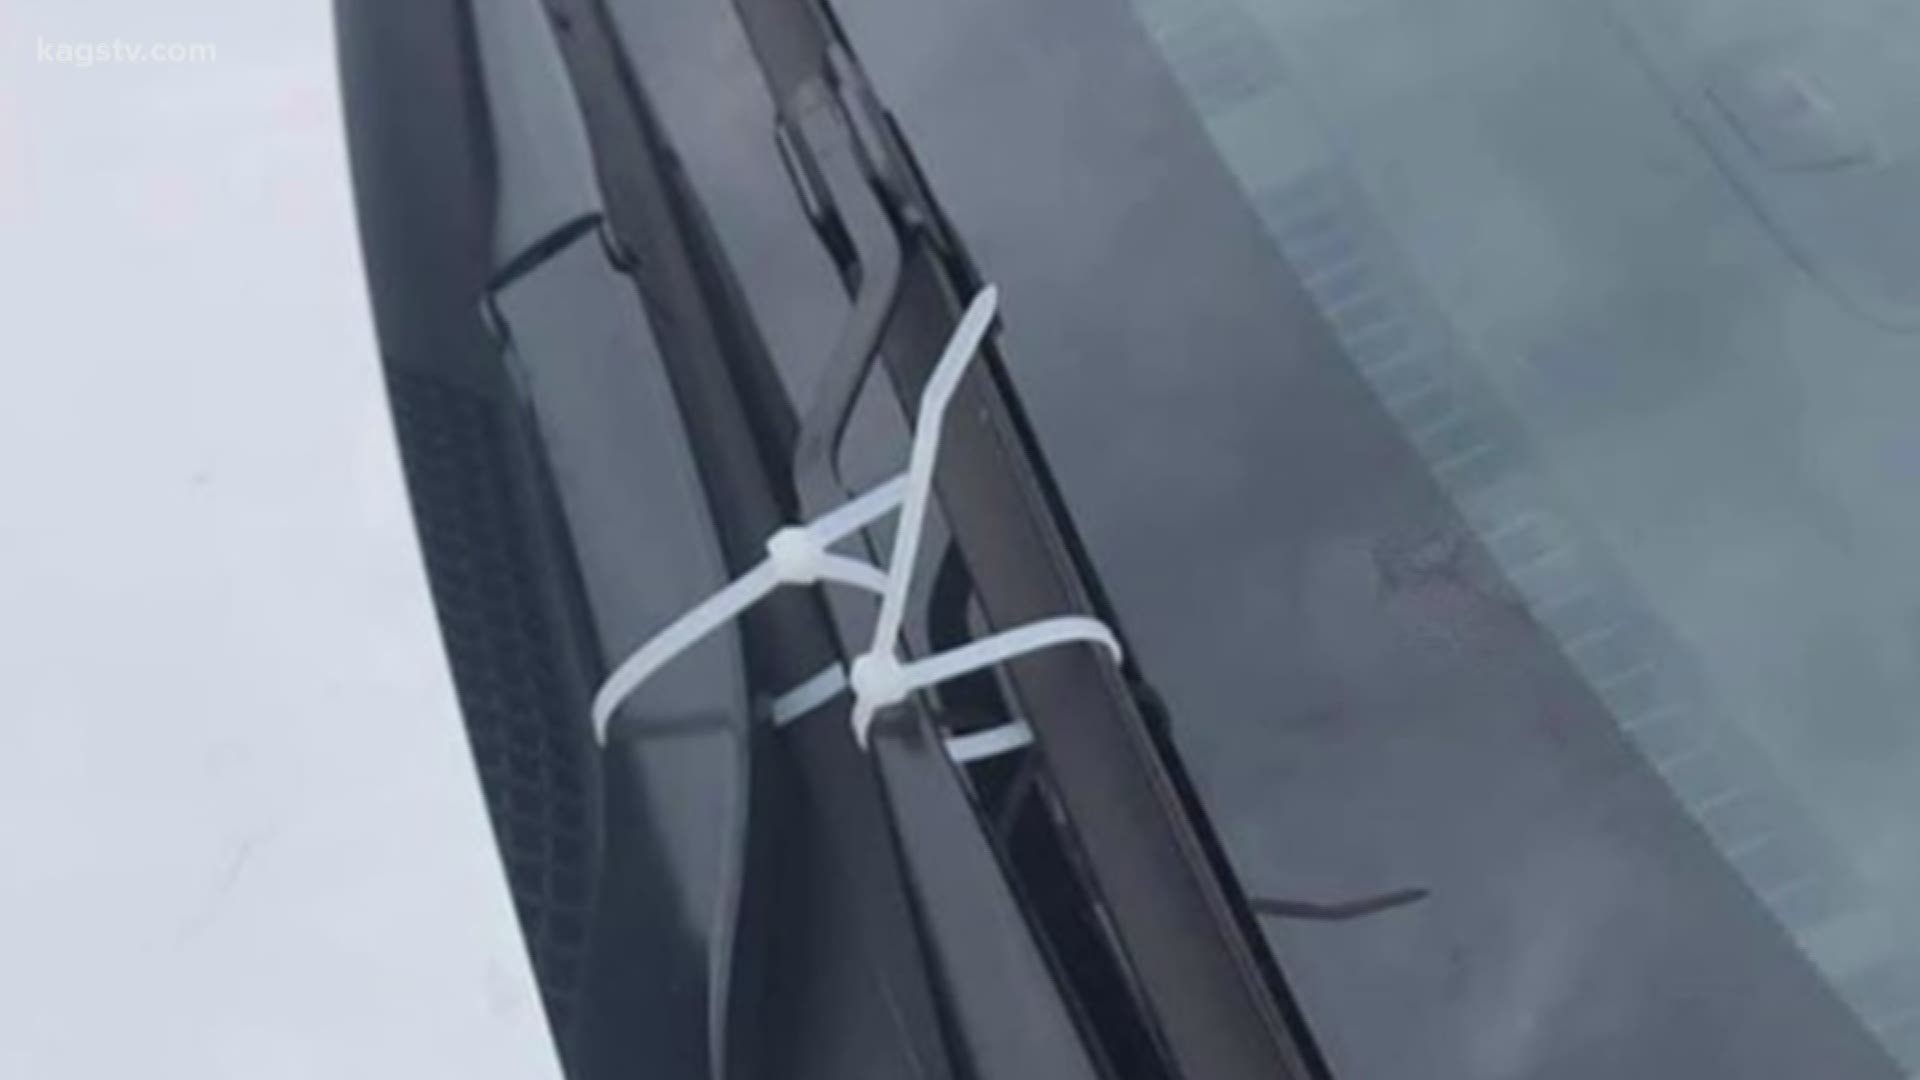 In a Twitter post, CSPD said that while a viral post about zip ties on windshield wipers